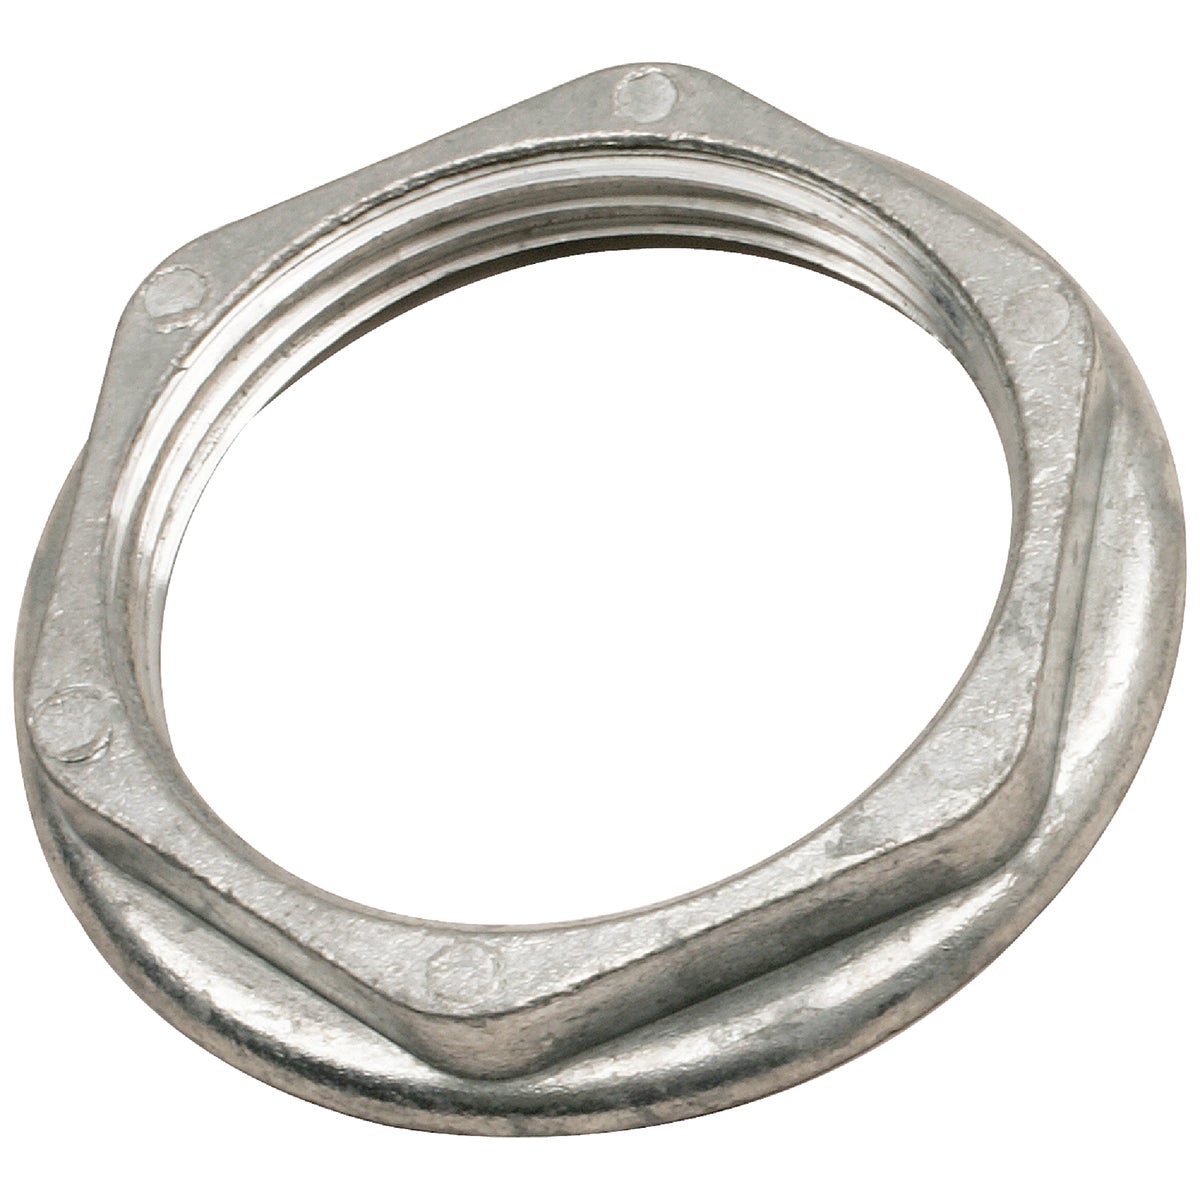 Item 440320, Jam nut.<br>
<br><b>No. DIB855-22:</b> Size: 1-1/2 In., Finish: Metal, Material: Zinc, Pkg Qty: 1, Package Type: Card